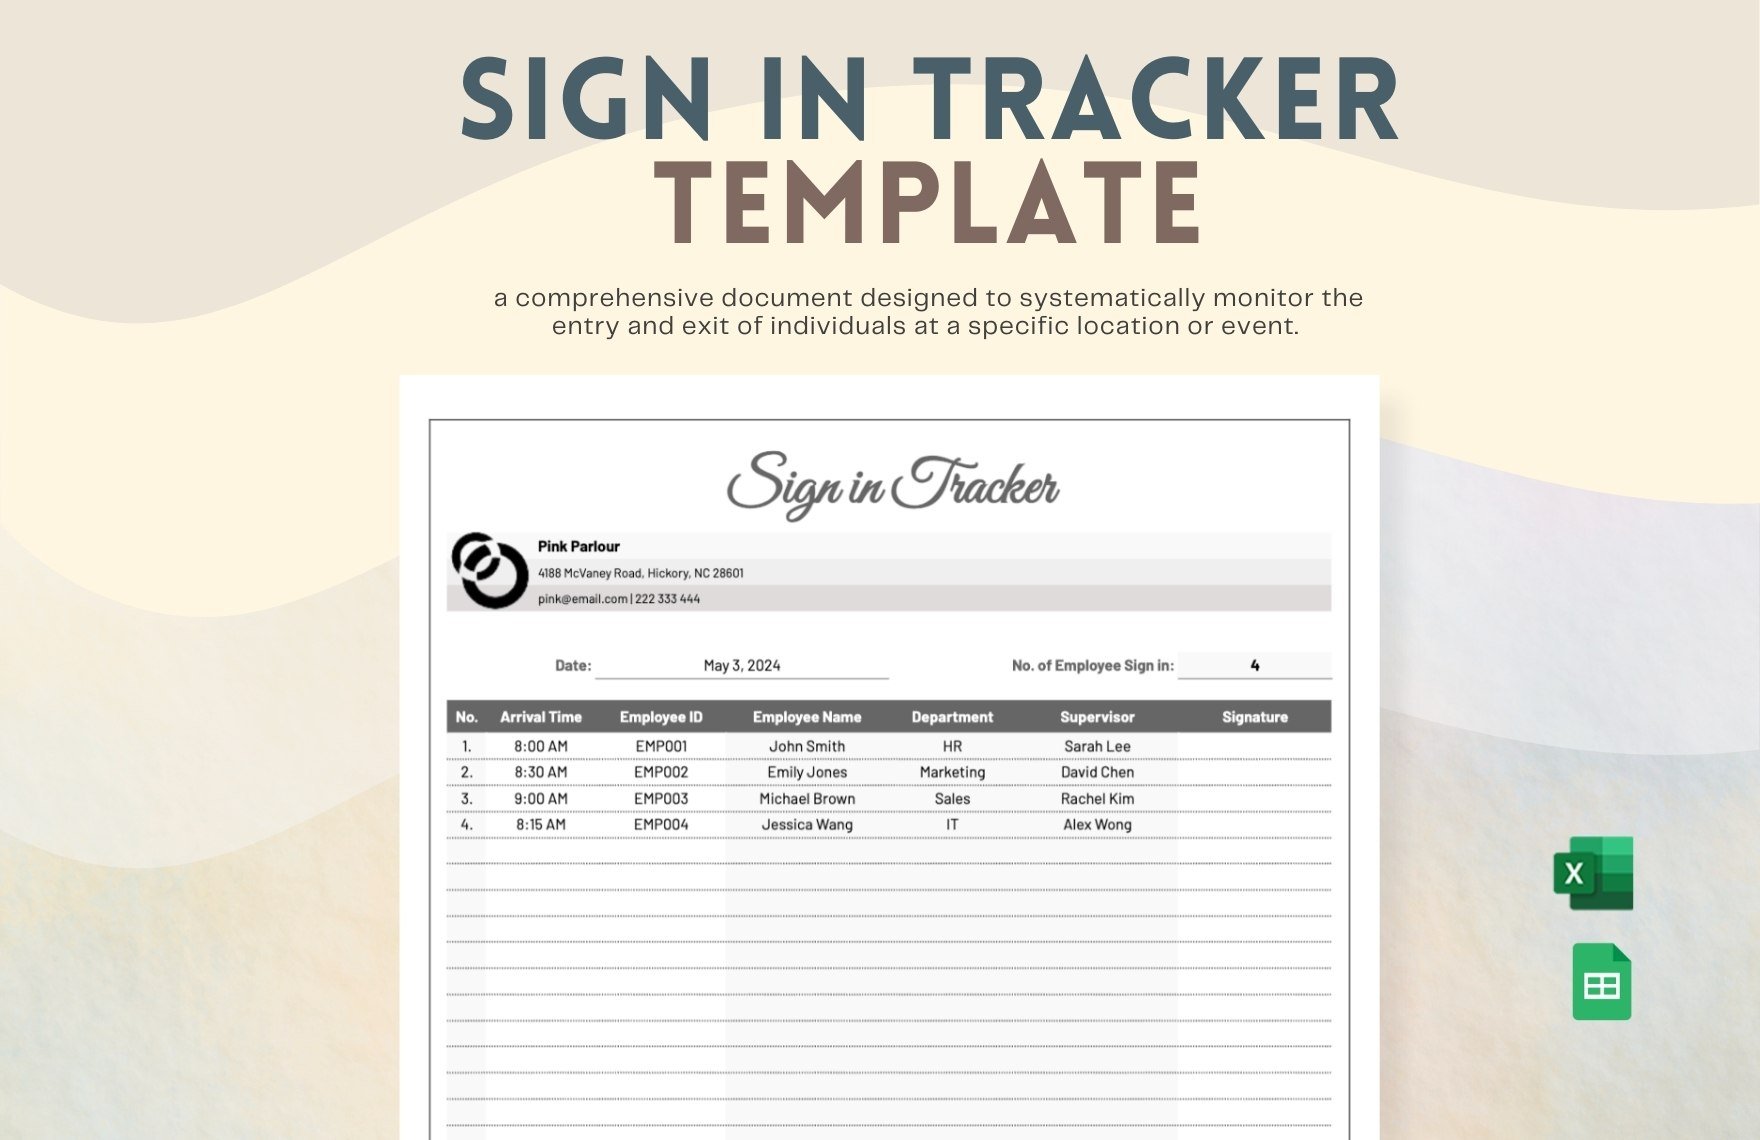 Sign in Tracker Template in Excel, Google Sheets